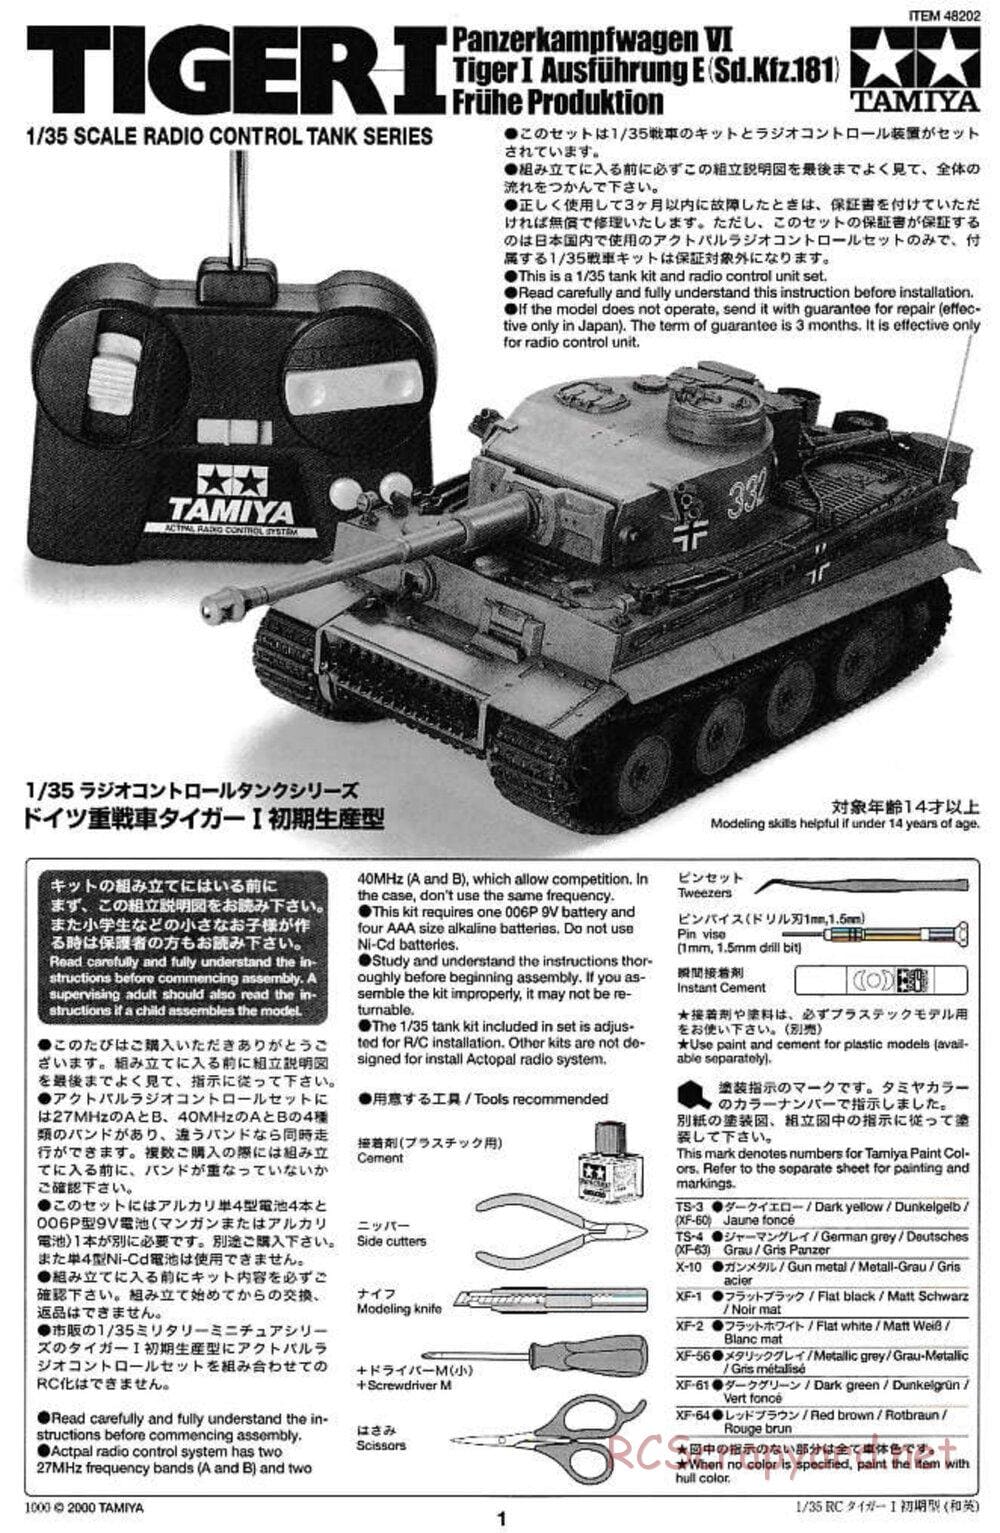 Tamiya - German Tiger 1 Early Production - 1/35 Scale Chassis - Manual - Page 1